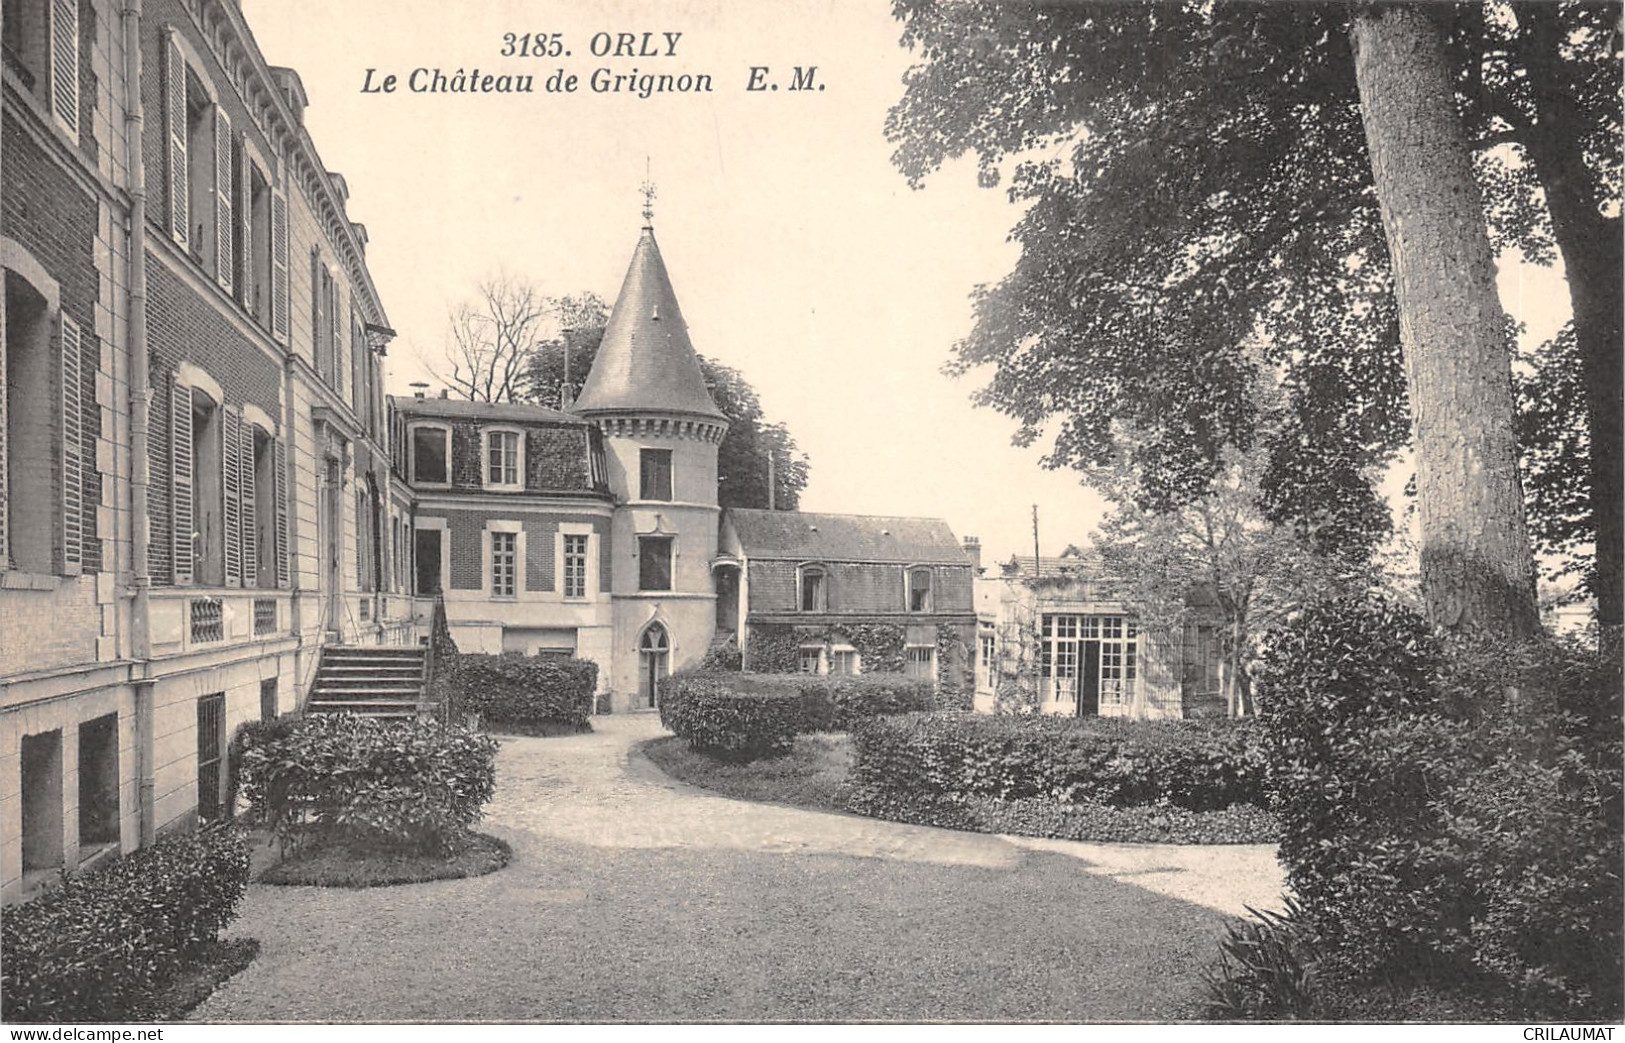 94-ORLY-CHATEAU DE GRIGNON-N 6013-C/0235 - Orly